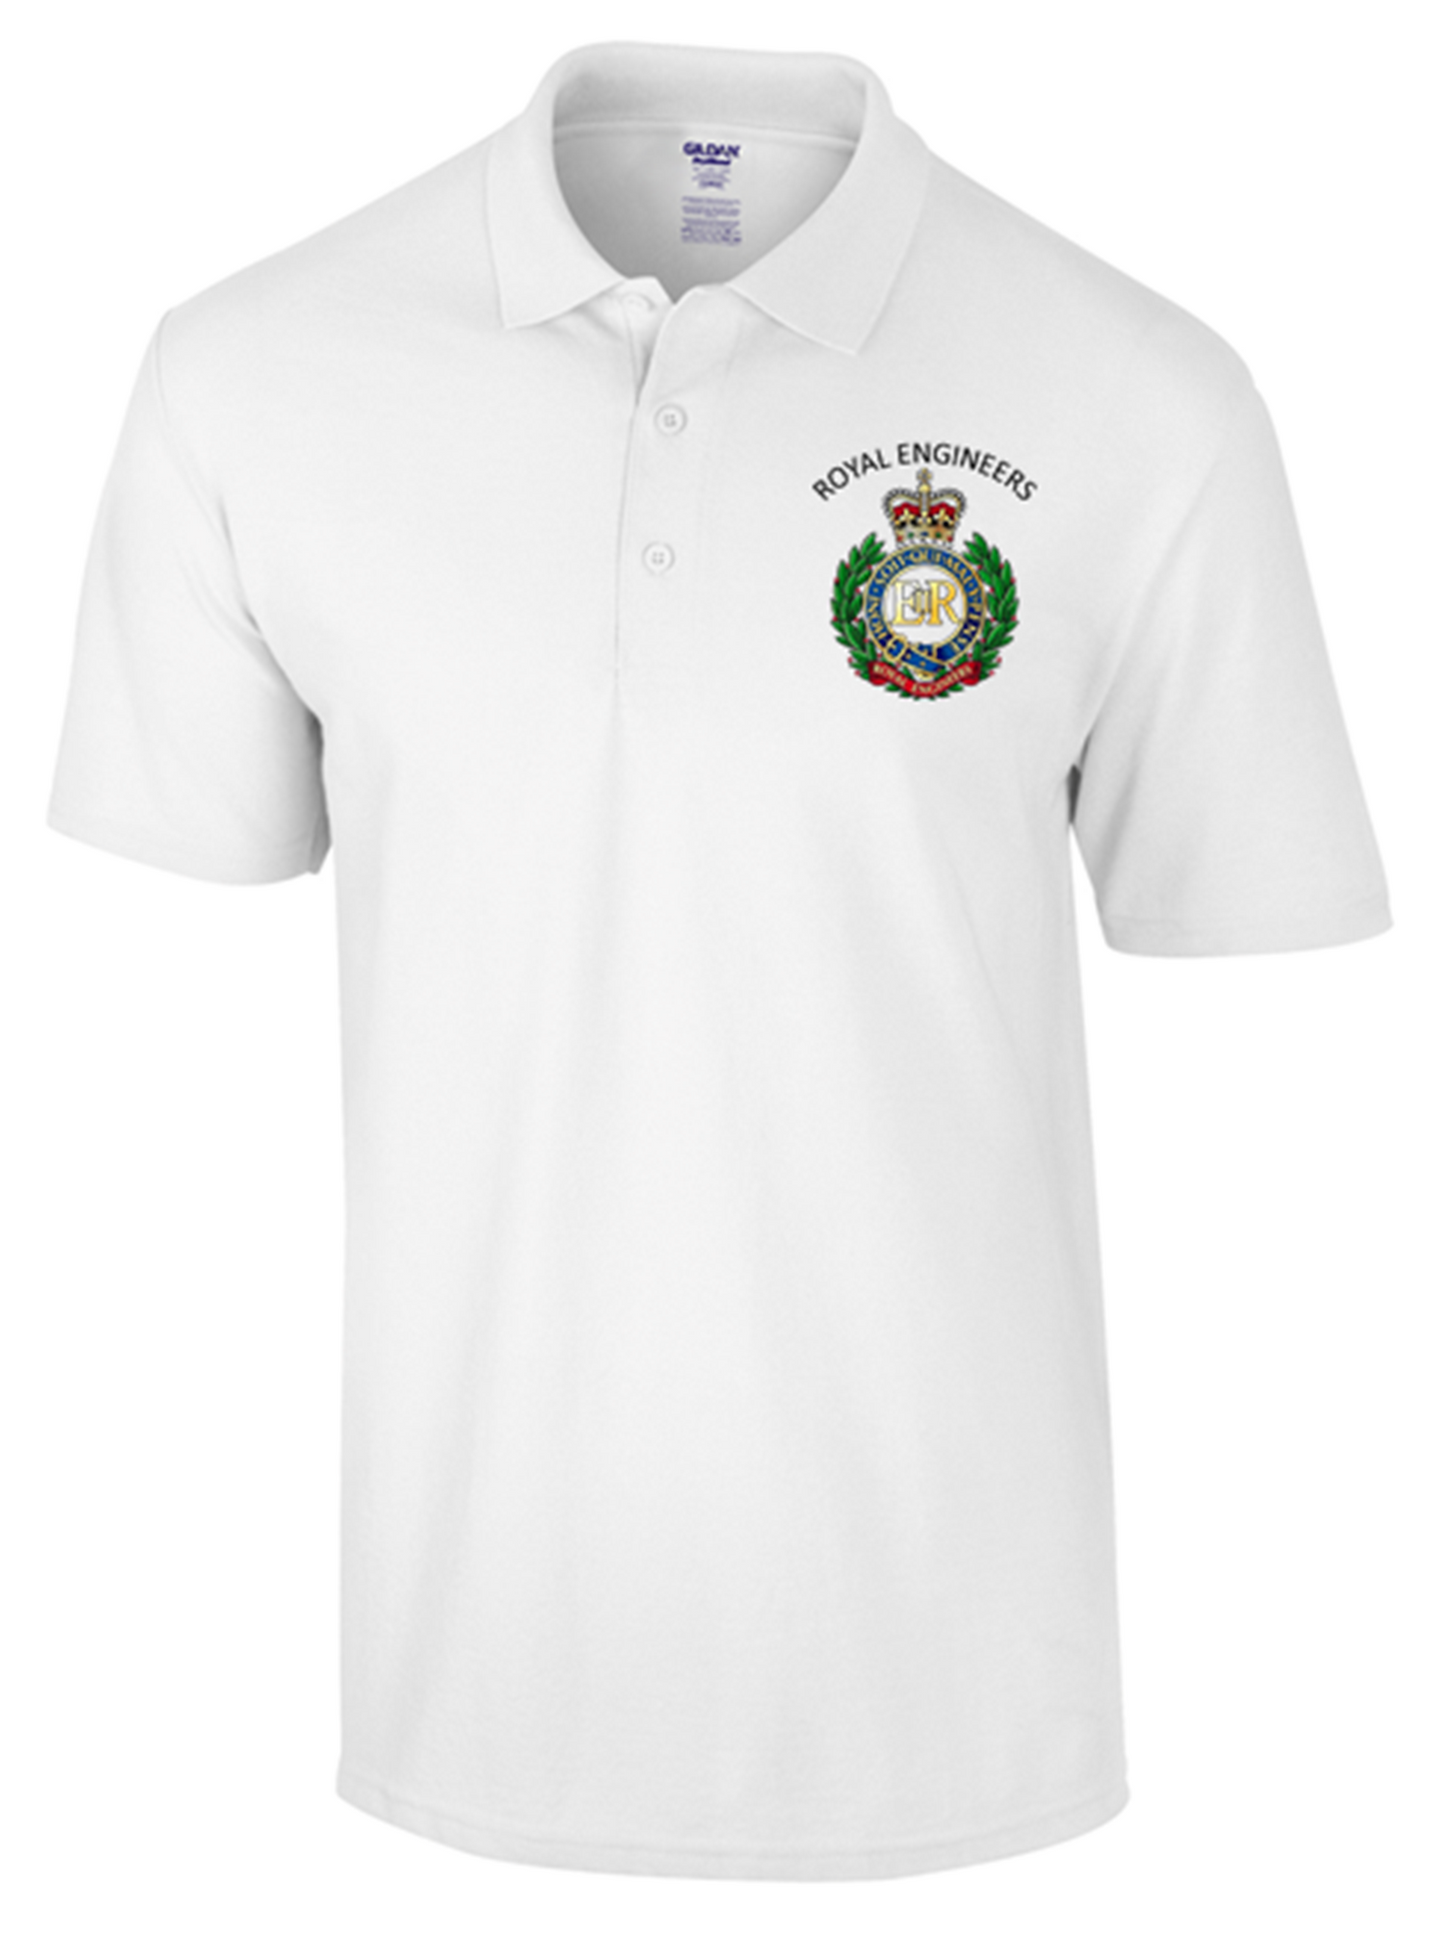 Royal Engineer Polo Shirt - Army 1157 kit S / White Army 1157 Kit Veterans Owned Business